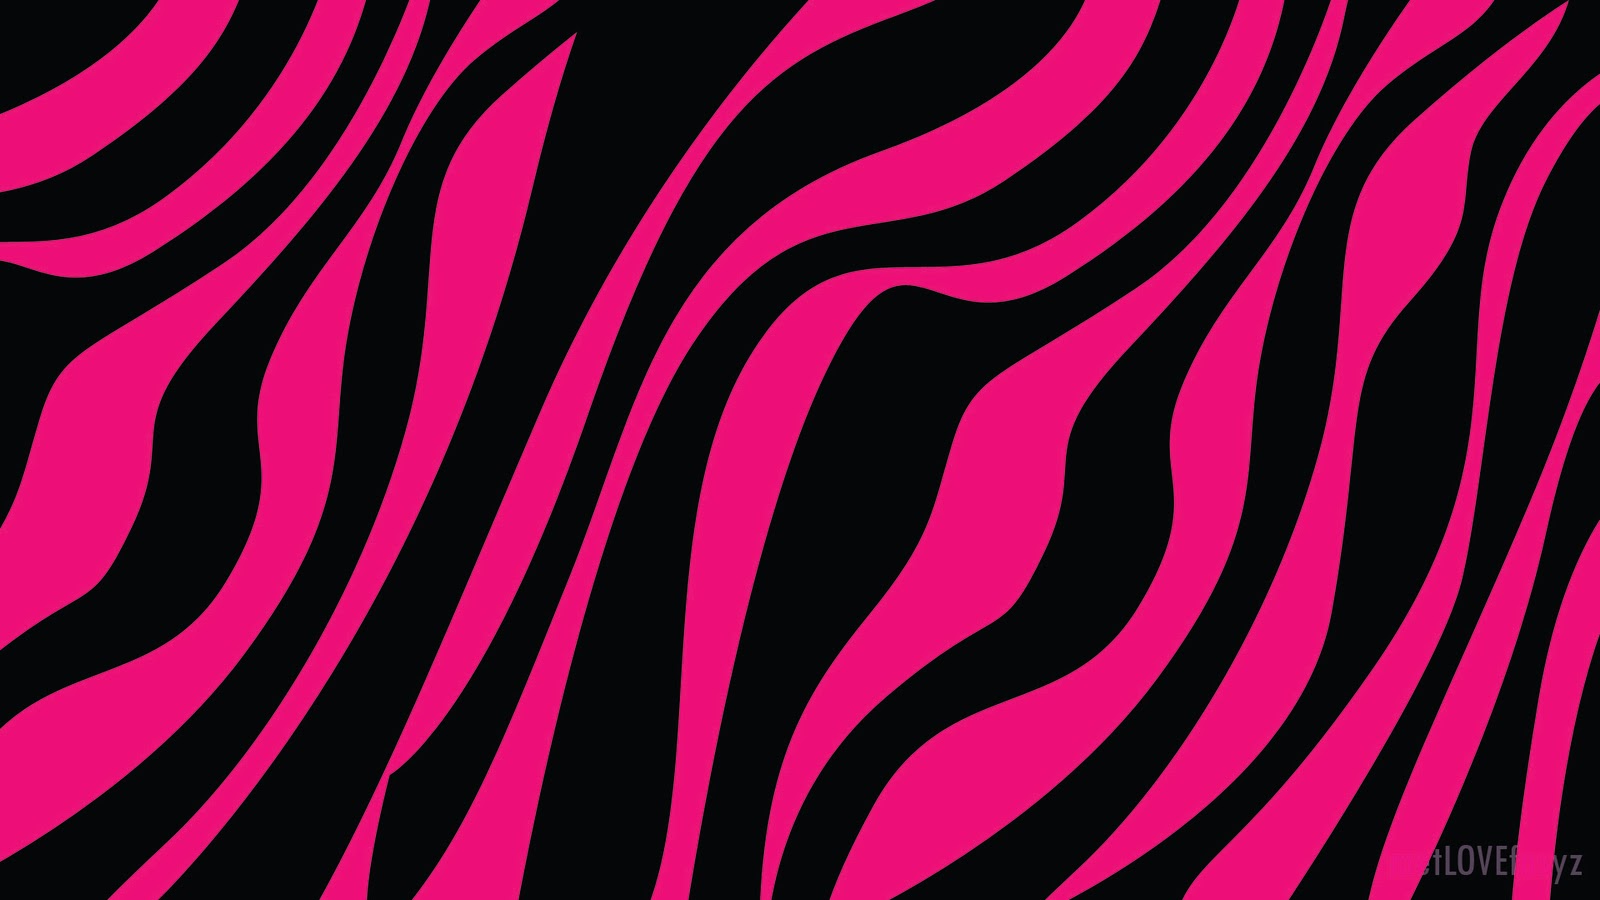 Here Is Hot Pink Zebra Wallpaper And Photos Gallery